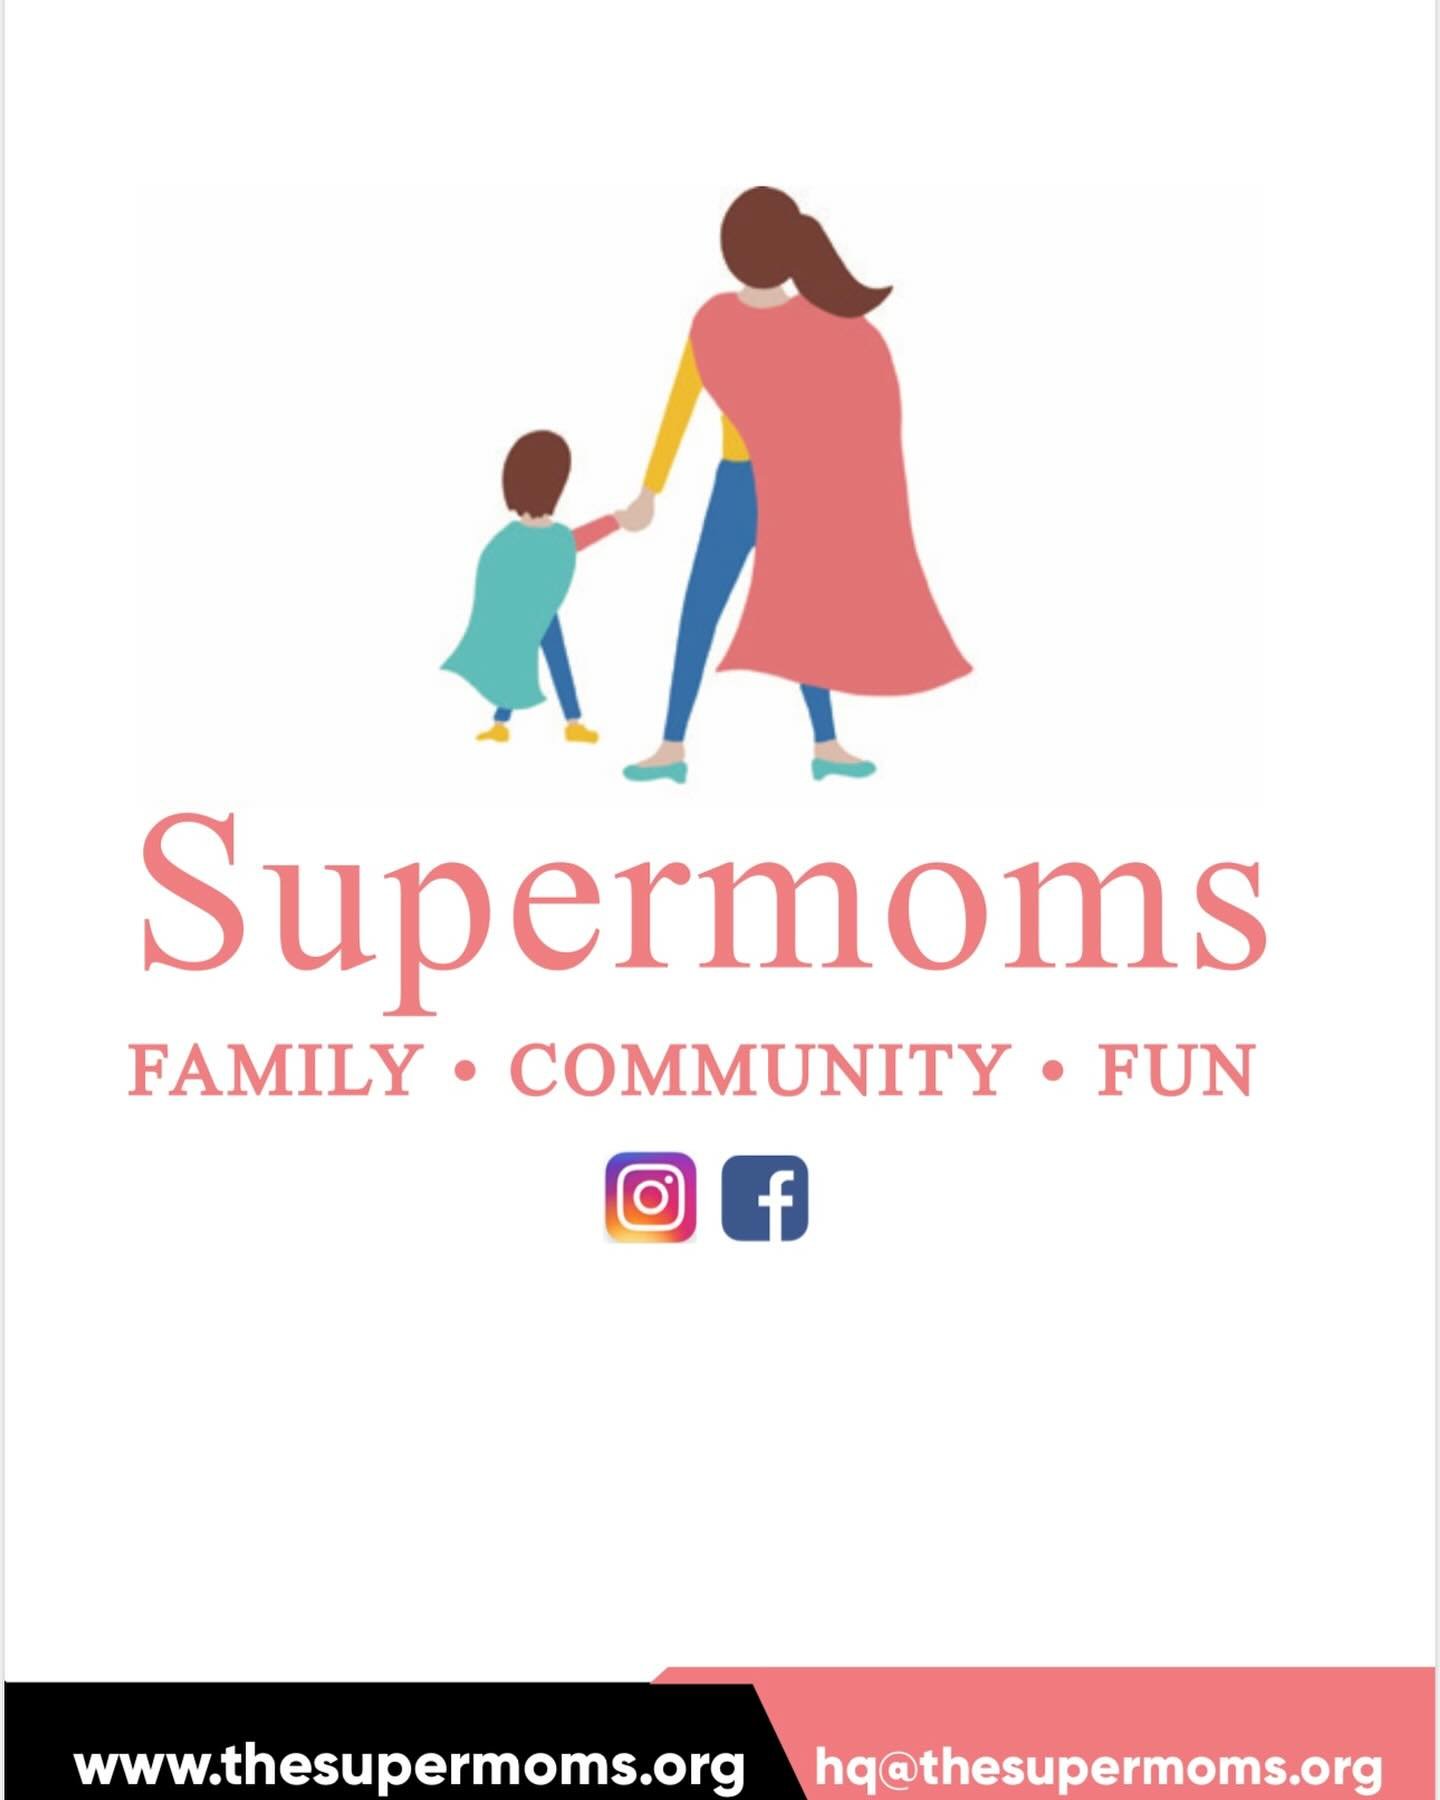 Are you ready for some more exciting events, contests and collabs? 

Let us know if you would like to join forces and email us at HQ@thesupermoms.org